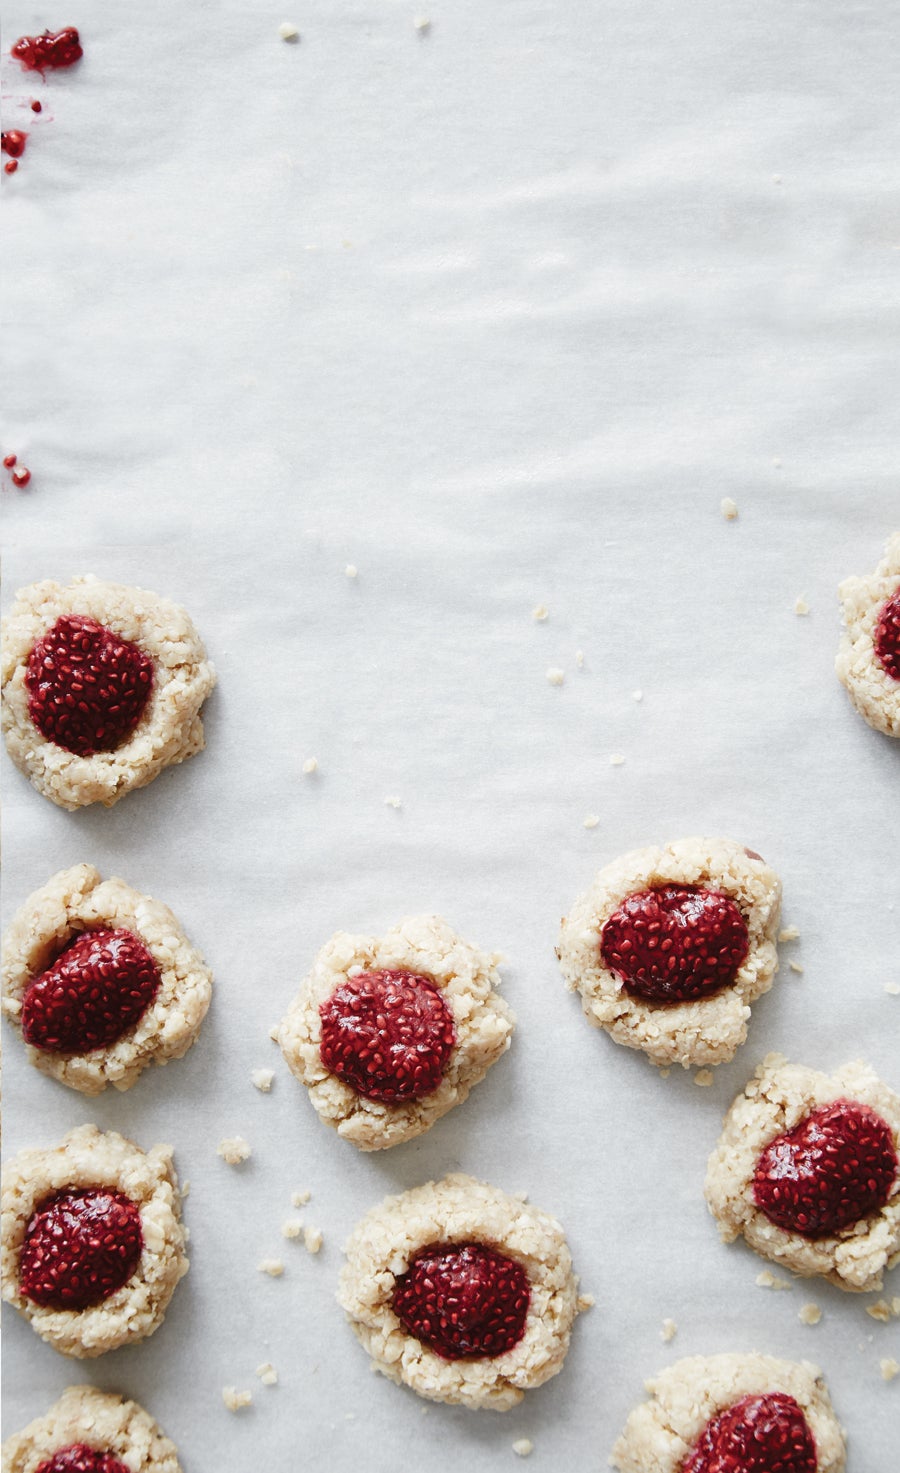 Oat and Cashew Thumbprint Cookies with Berry-Chia Jam